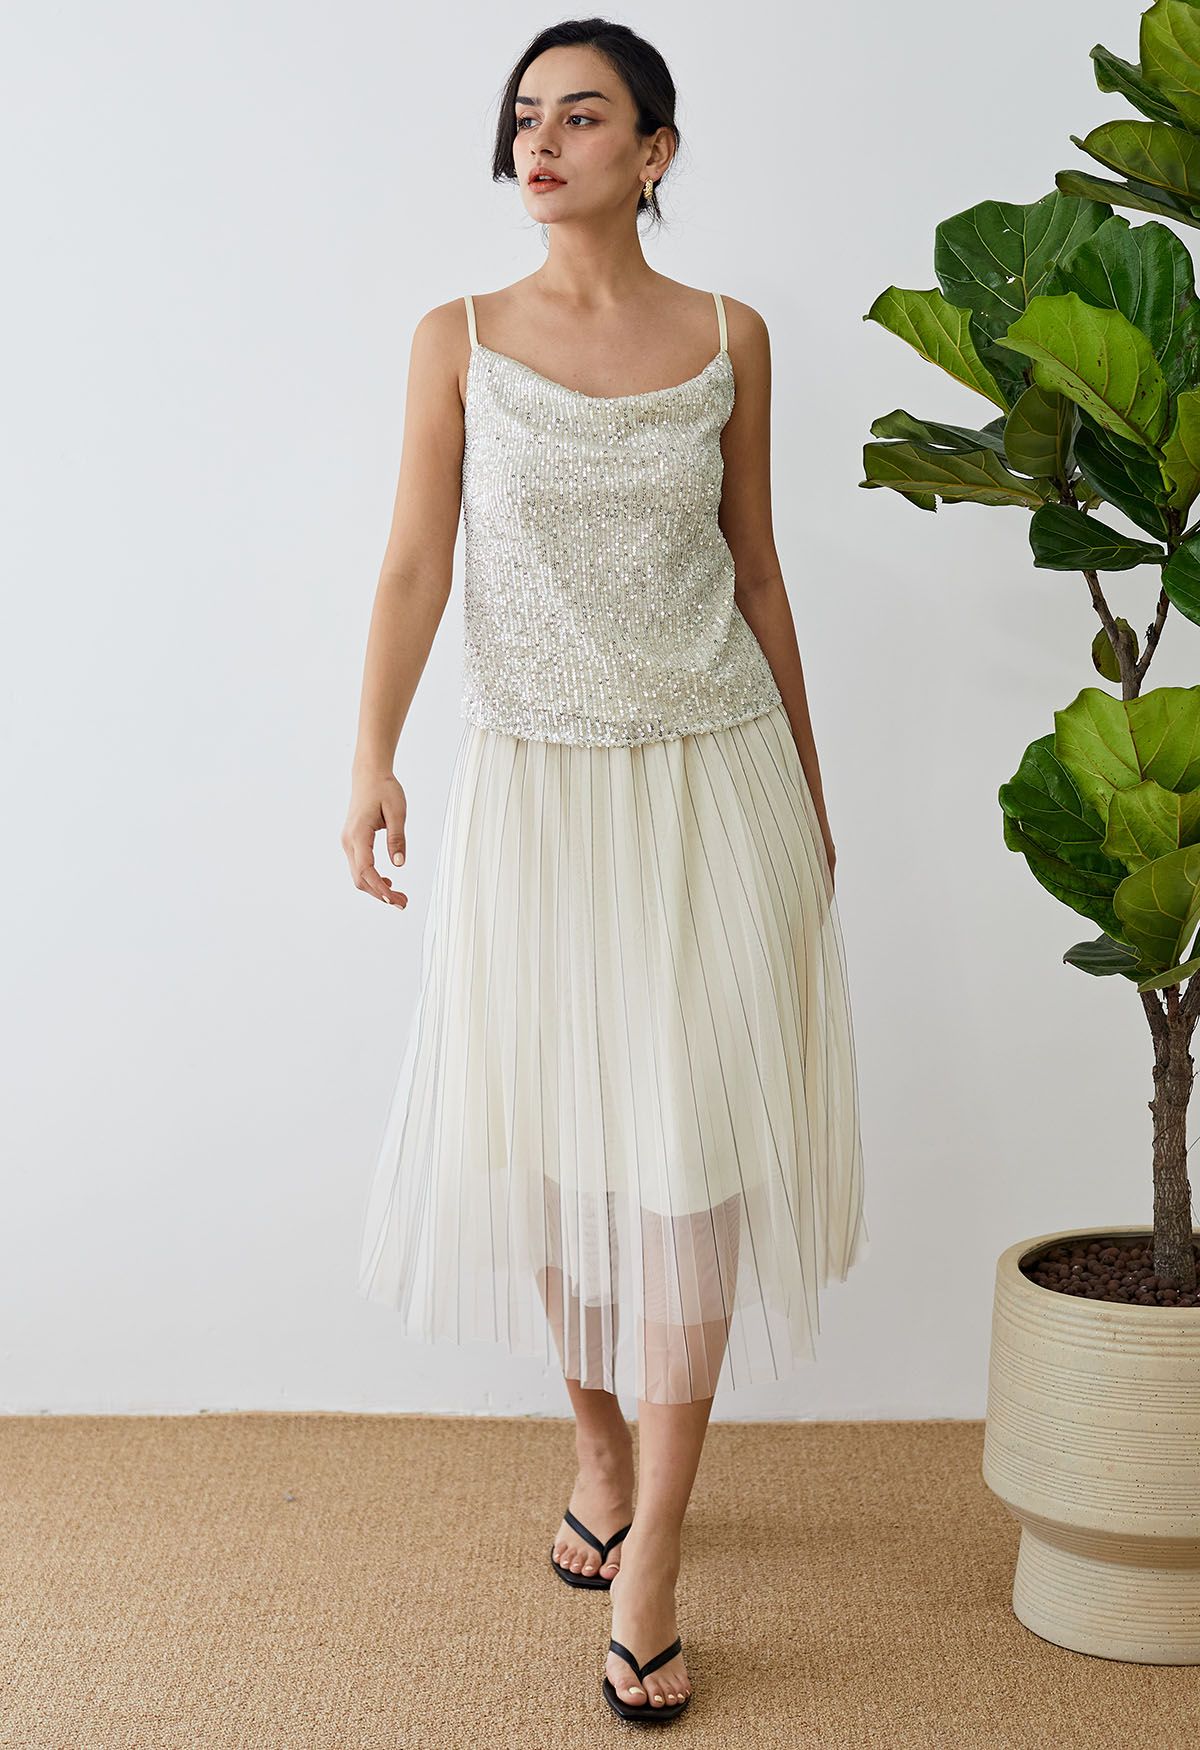 Contrast Lines Pleated Mesh Tulle Midi Skirt in Cream